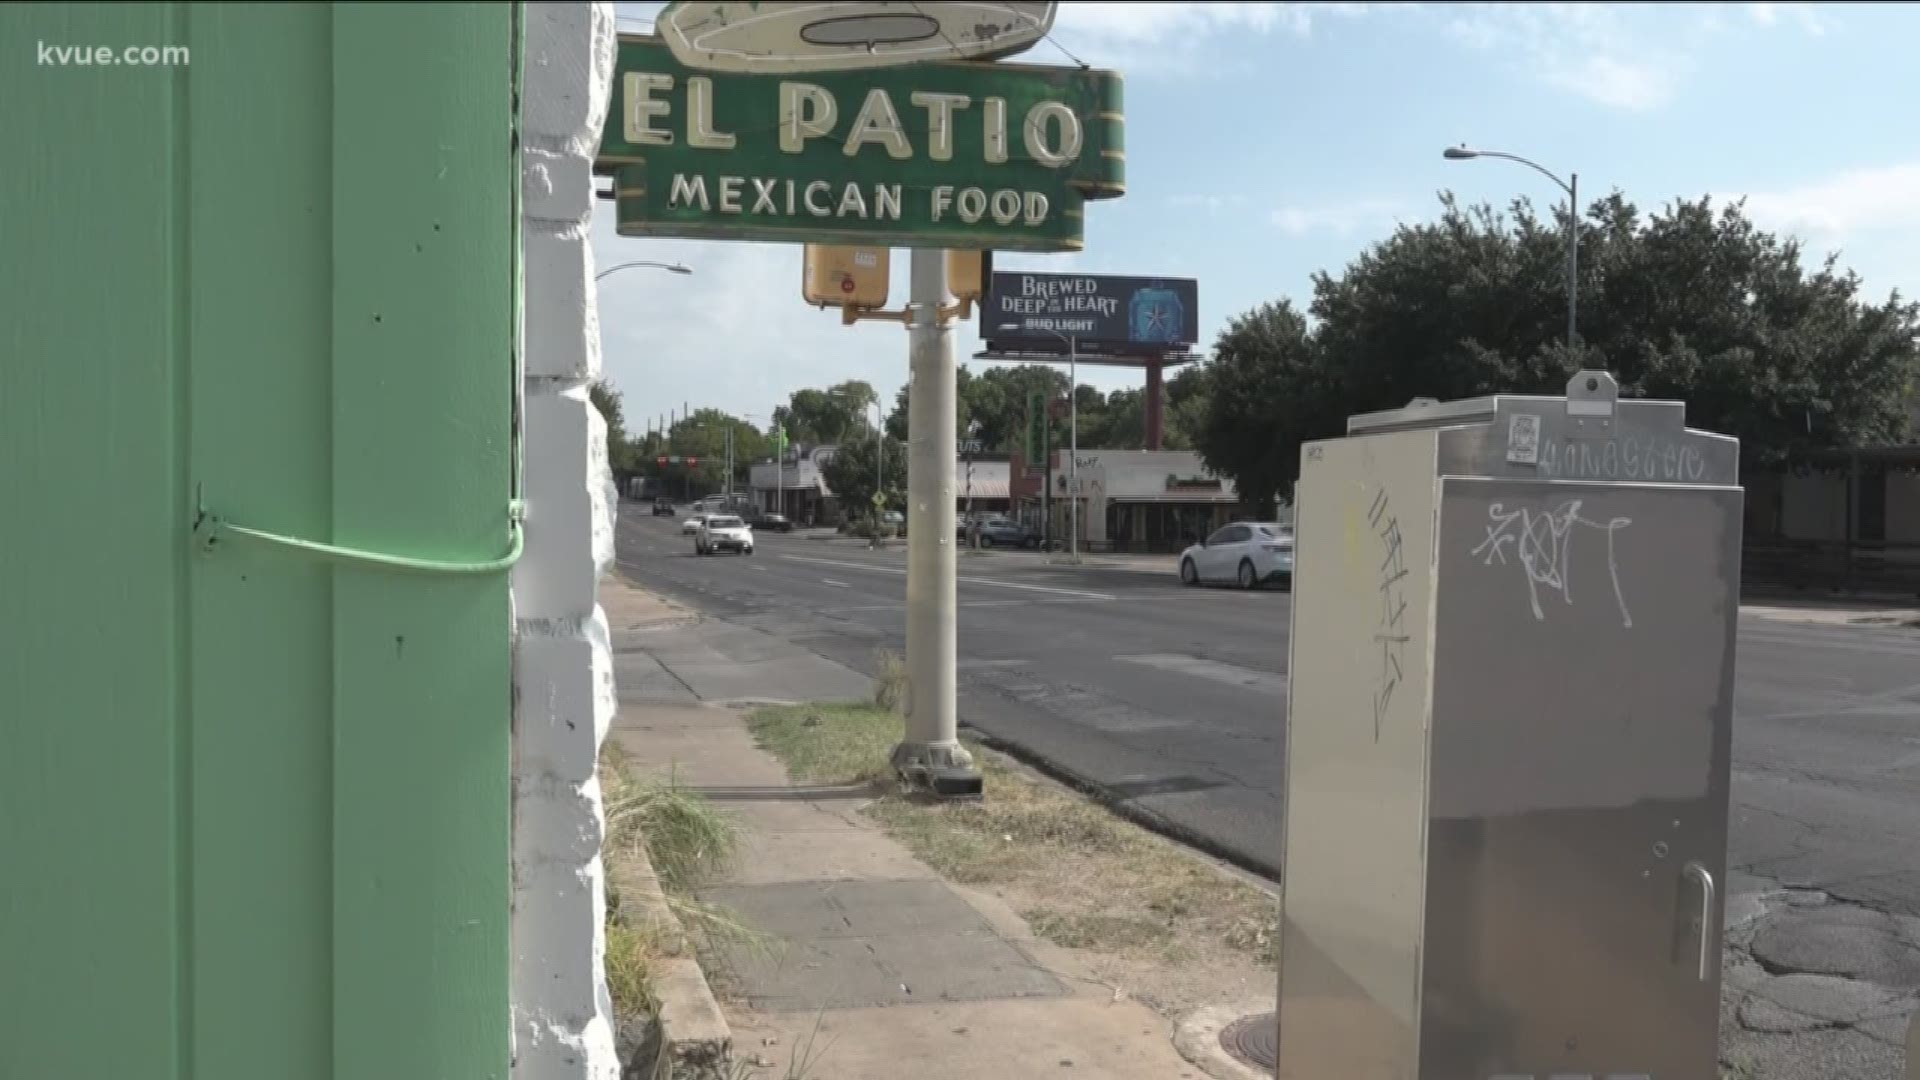 It's El Patio's first week serving food and their owners say it's going smoothly.